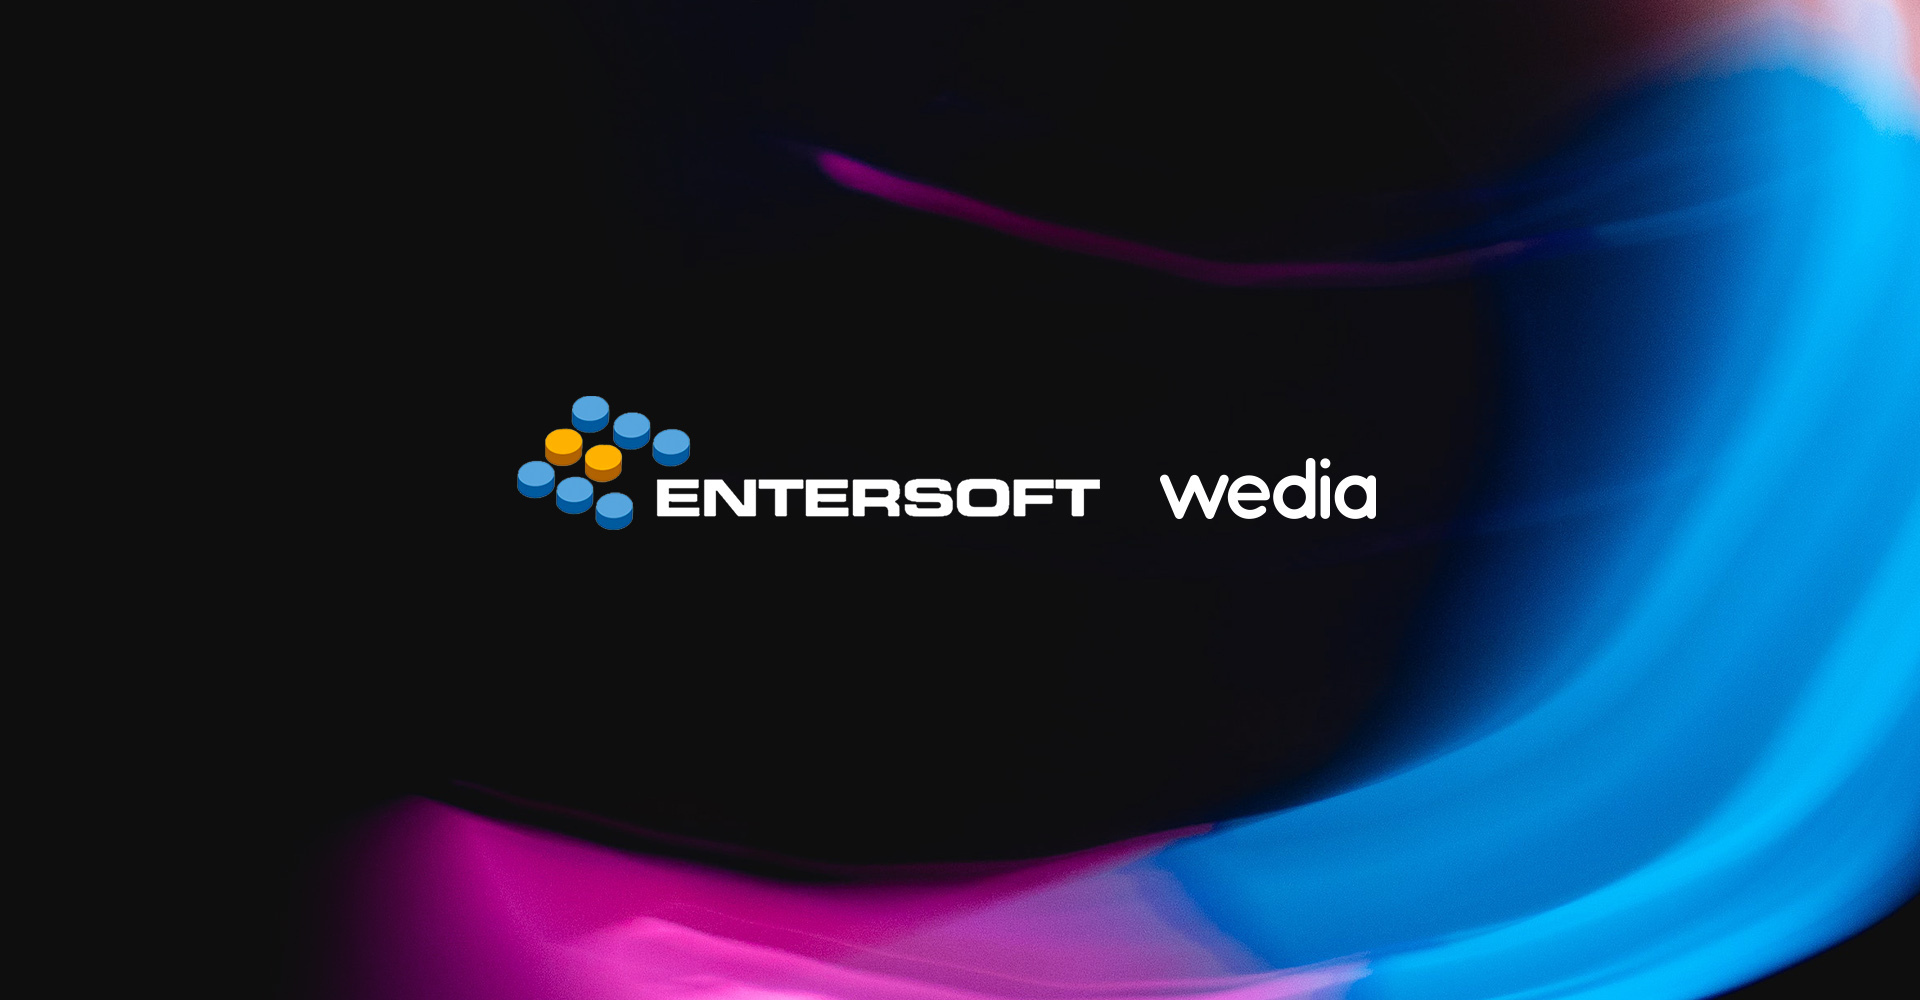 Entersoft invests in the growing market of eCommerce after acquiring 100% of Wedia